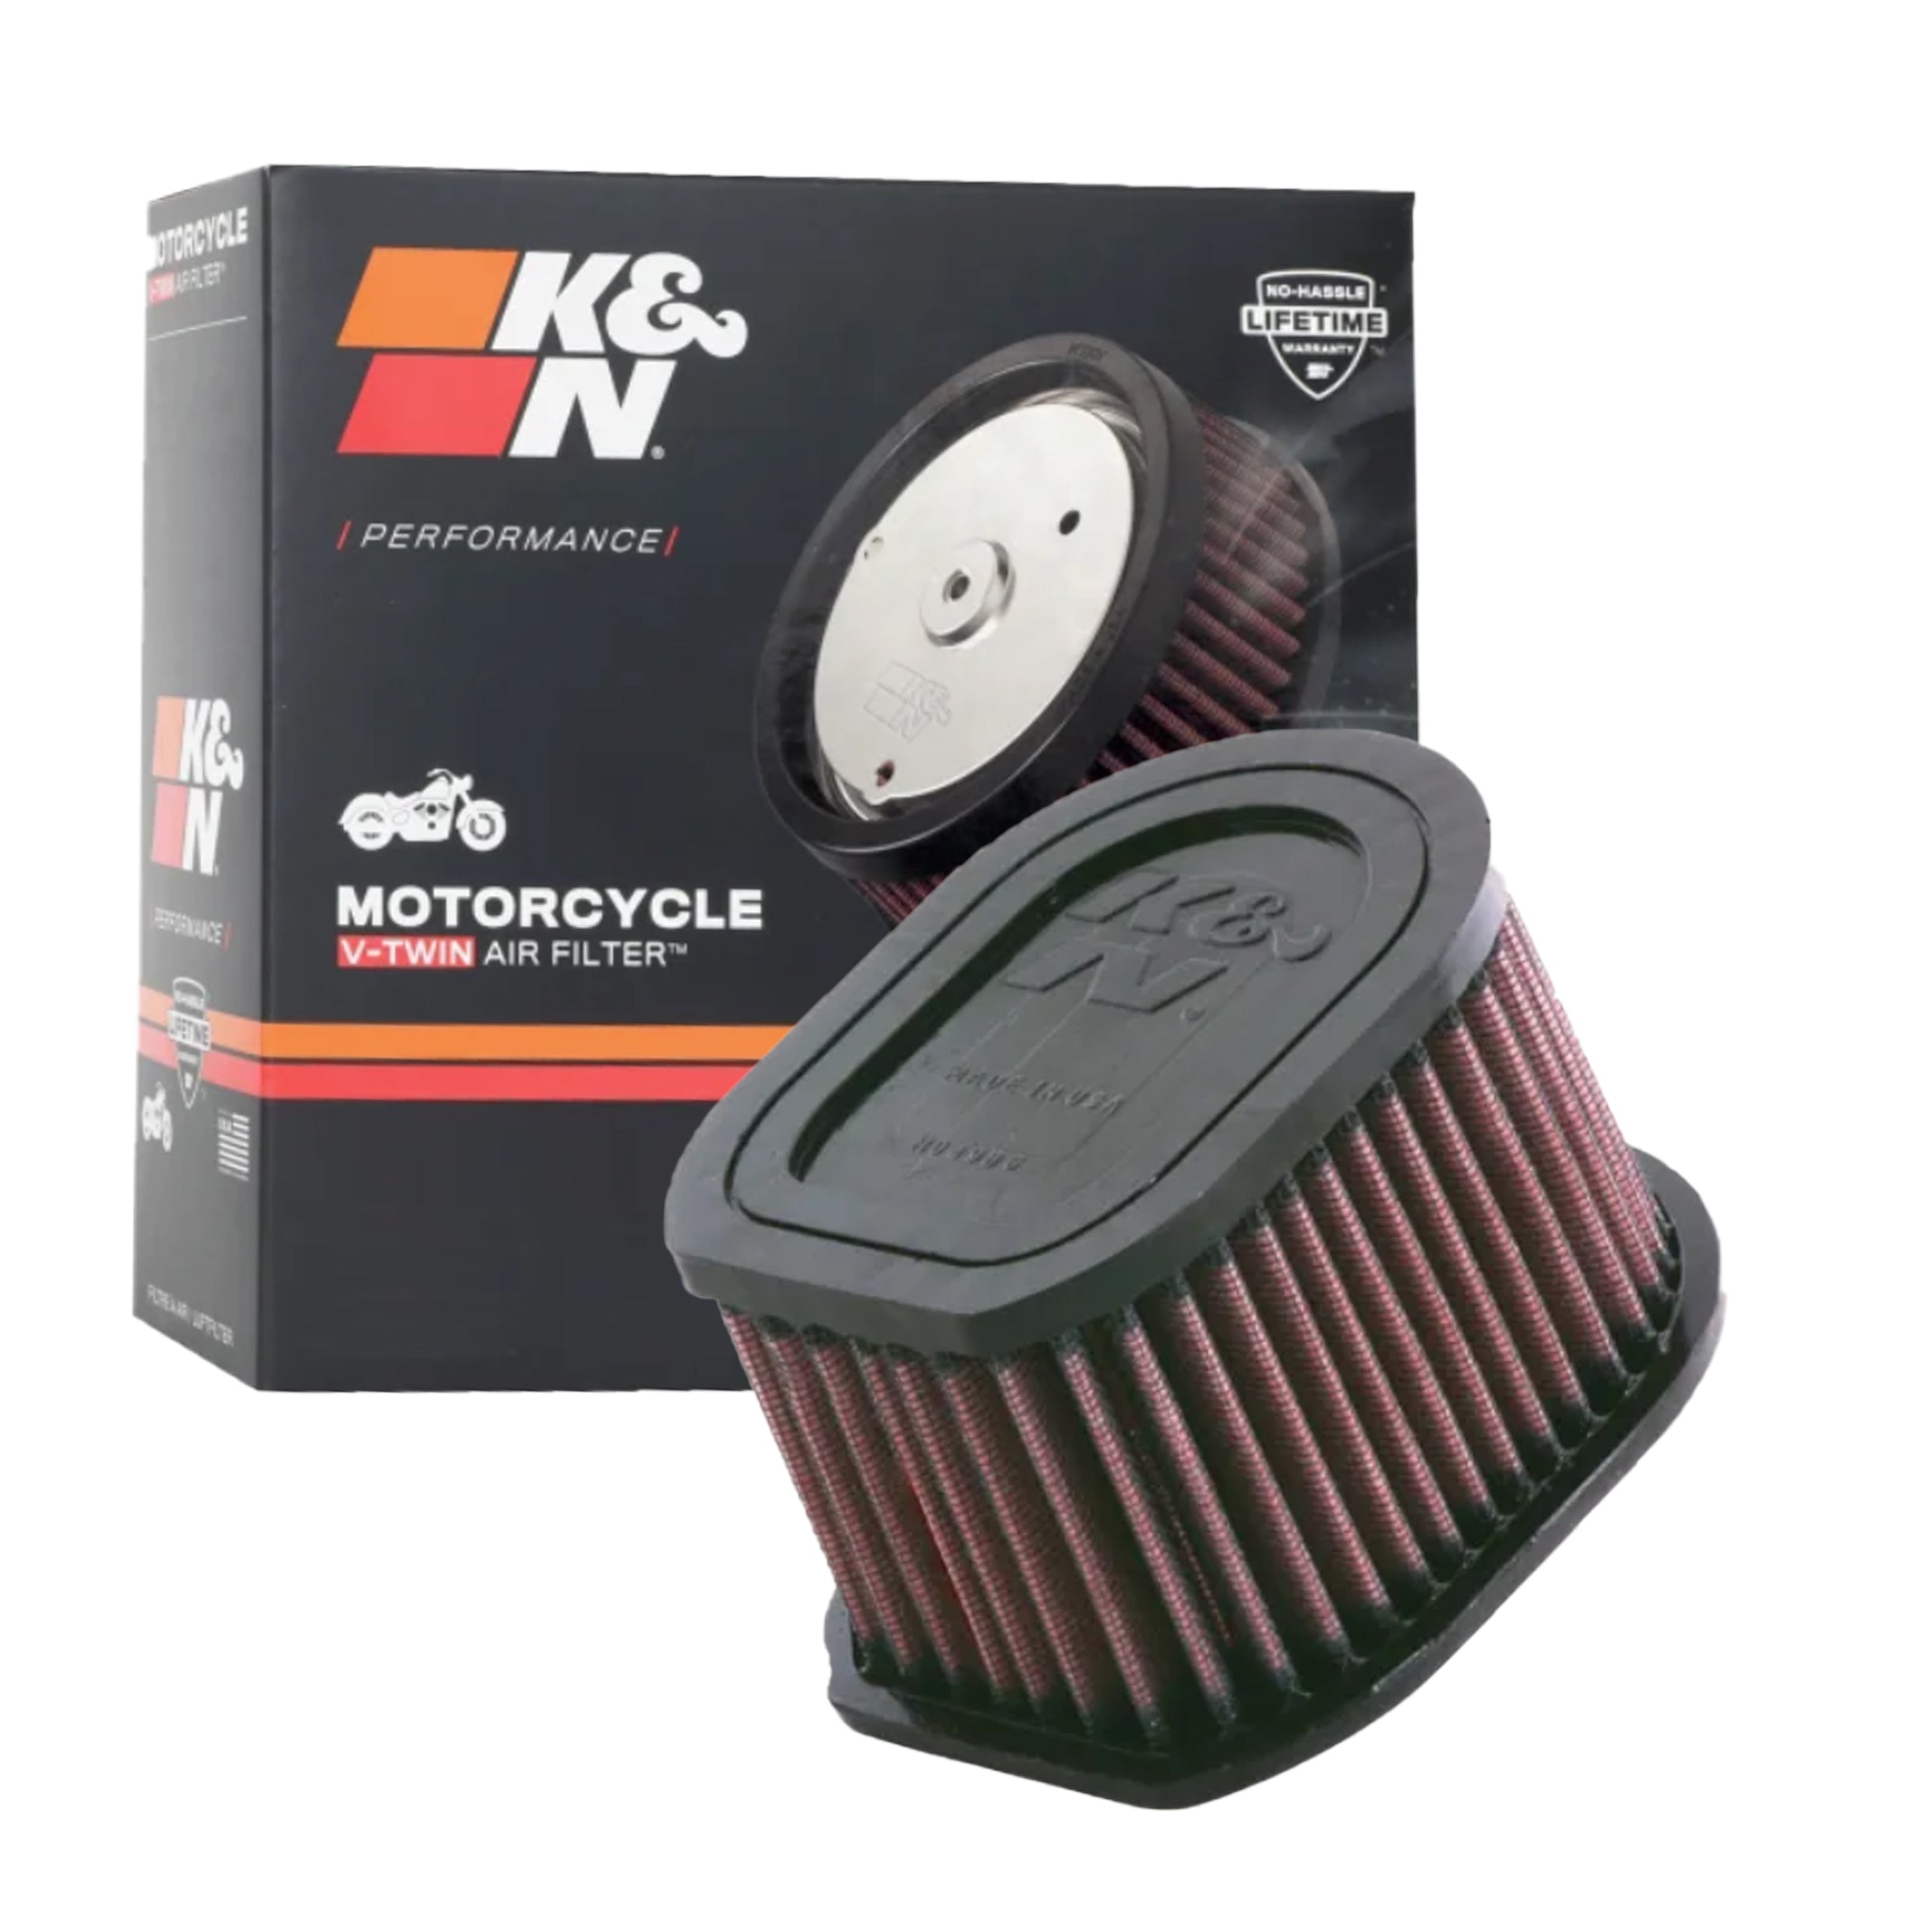 For Kawasaki Z750 Z750R Z750S Z800 ZR800 Z1000 Motorcycle Accessories  AirFilter Air Intake Cleaner Filter Replacement Parts